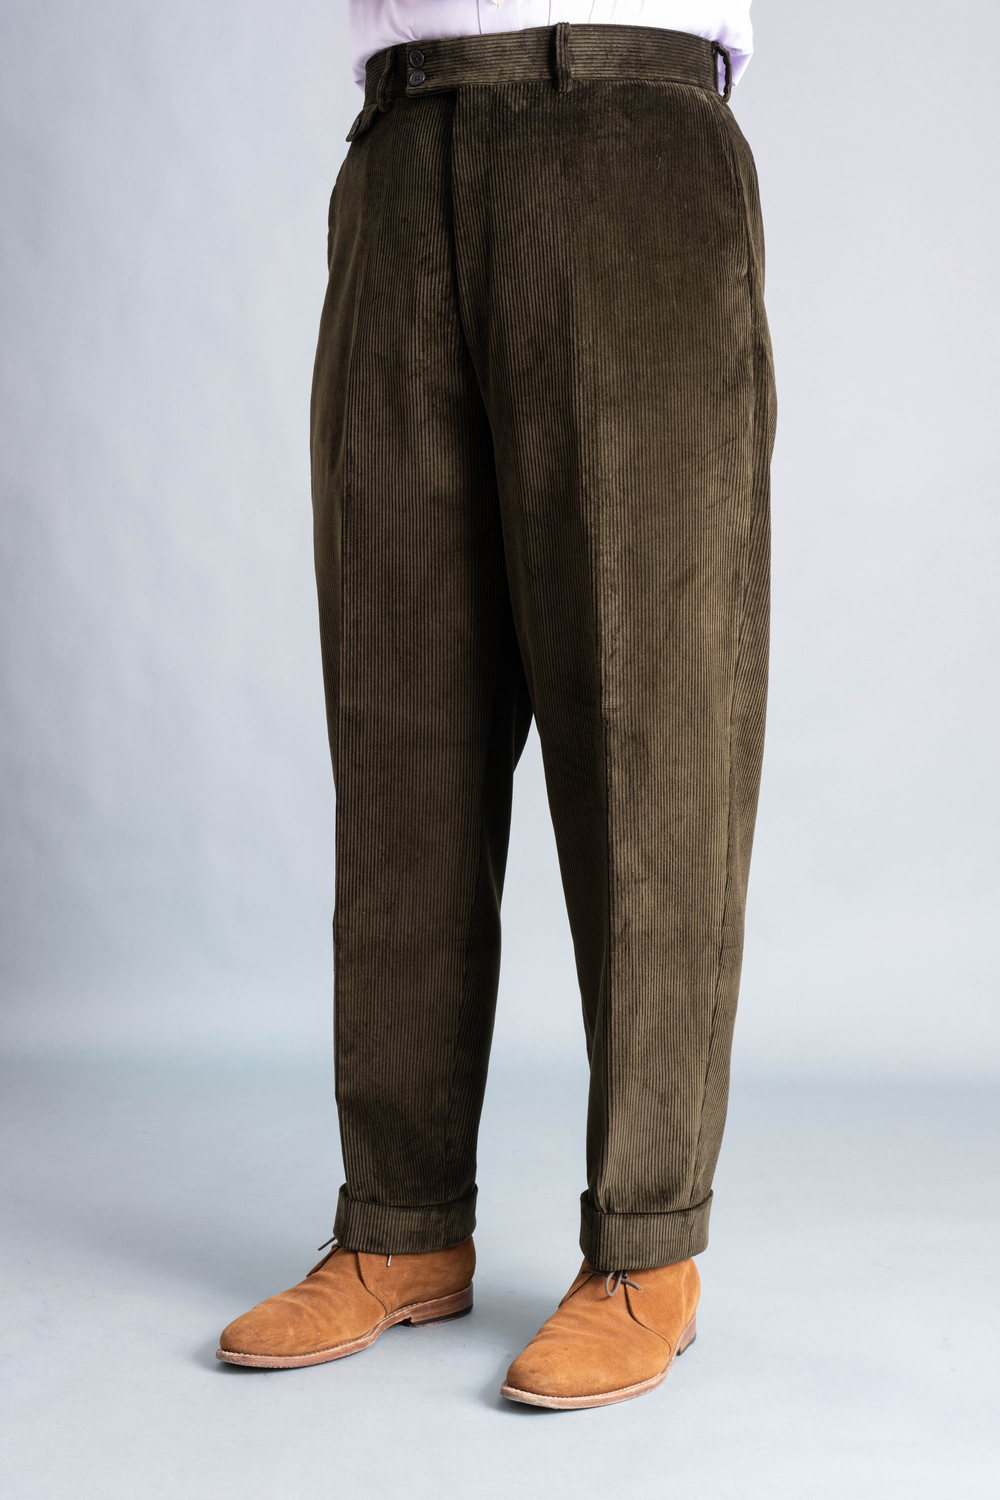 Pale Taupe Corduroy Trousers - Stancliffe Flat-Front in 8-Wale Cotton